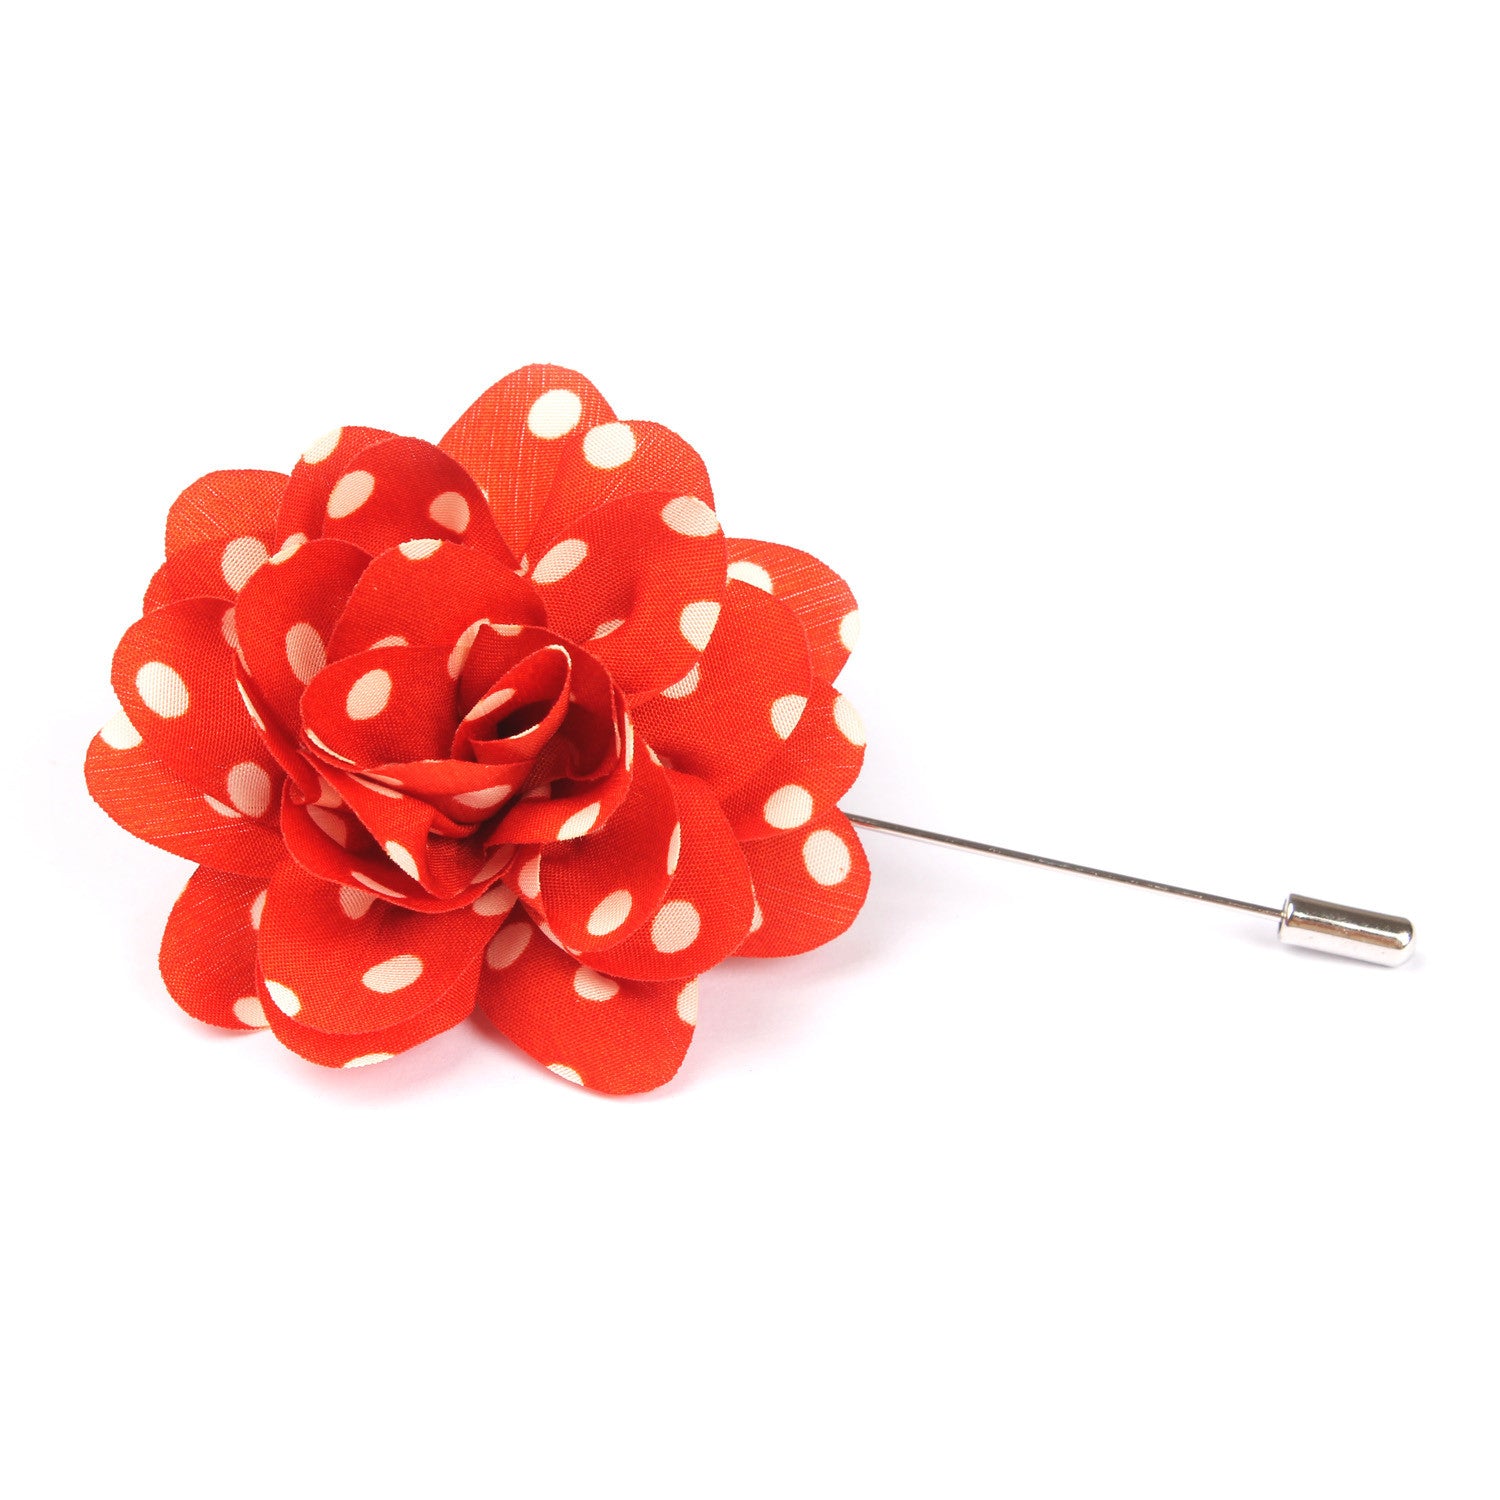 Arancione Orange Lapel Flower With White Polka Dots Pin Front Boutonniere